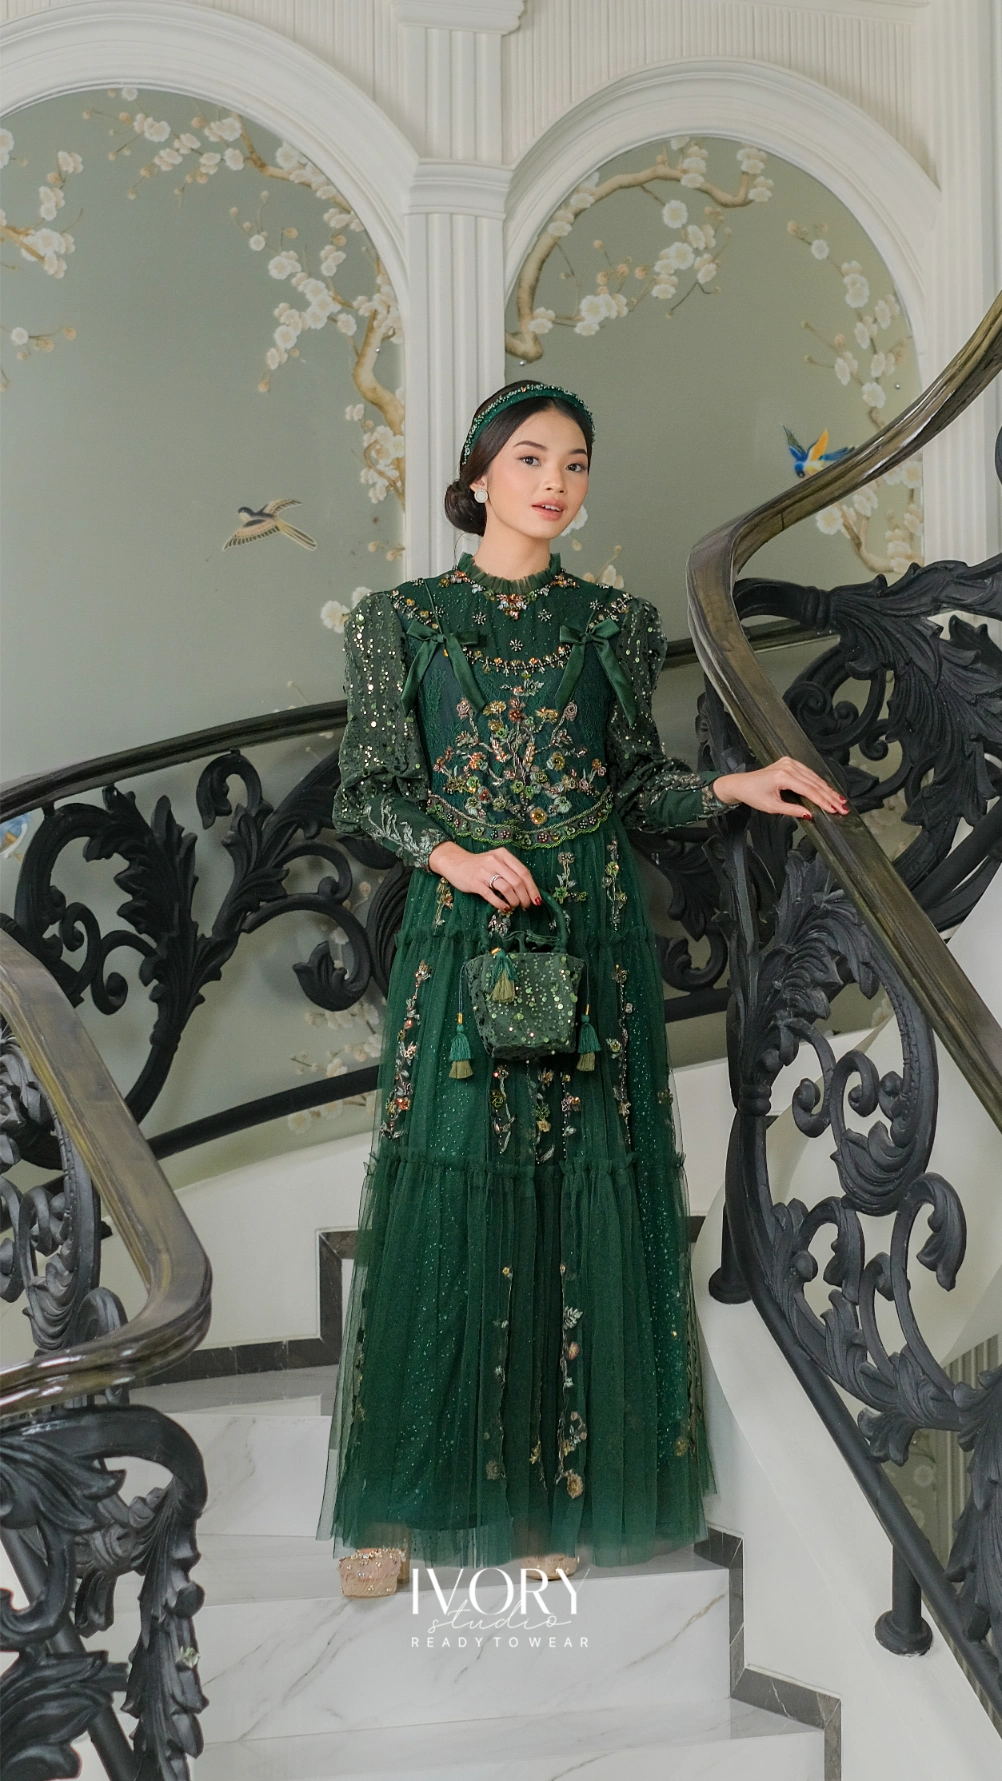 Emerald Green Lace Outfit for Women. Complete Womens Attire